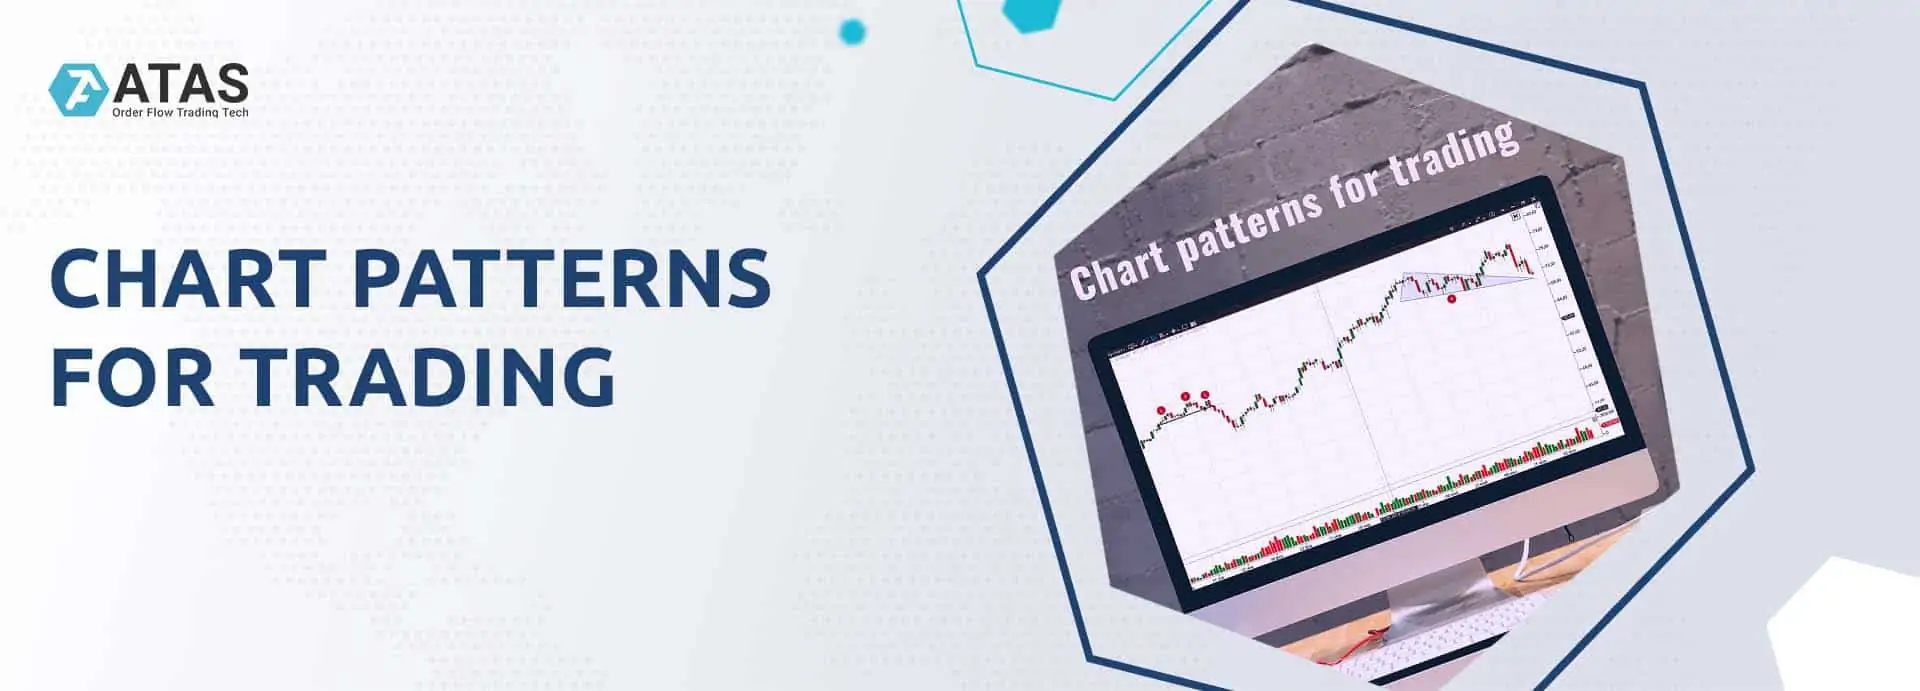 CHART PATTERNS FOR TRADING